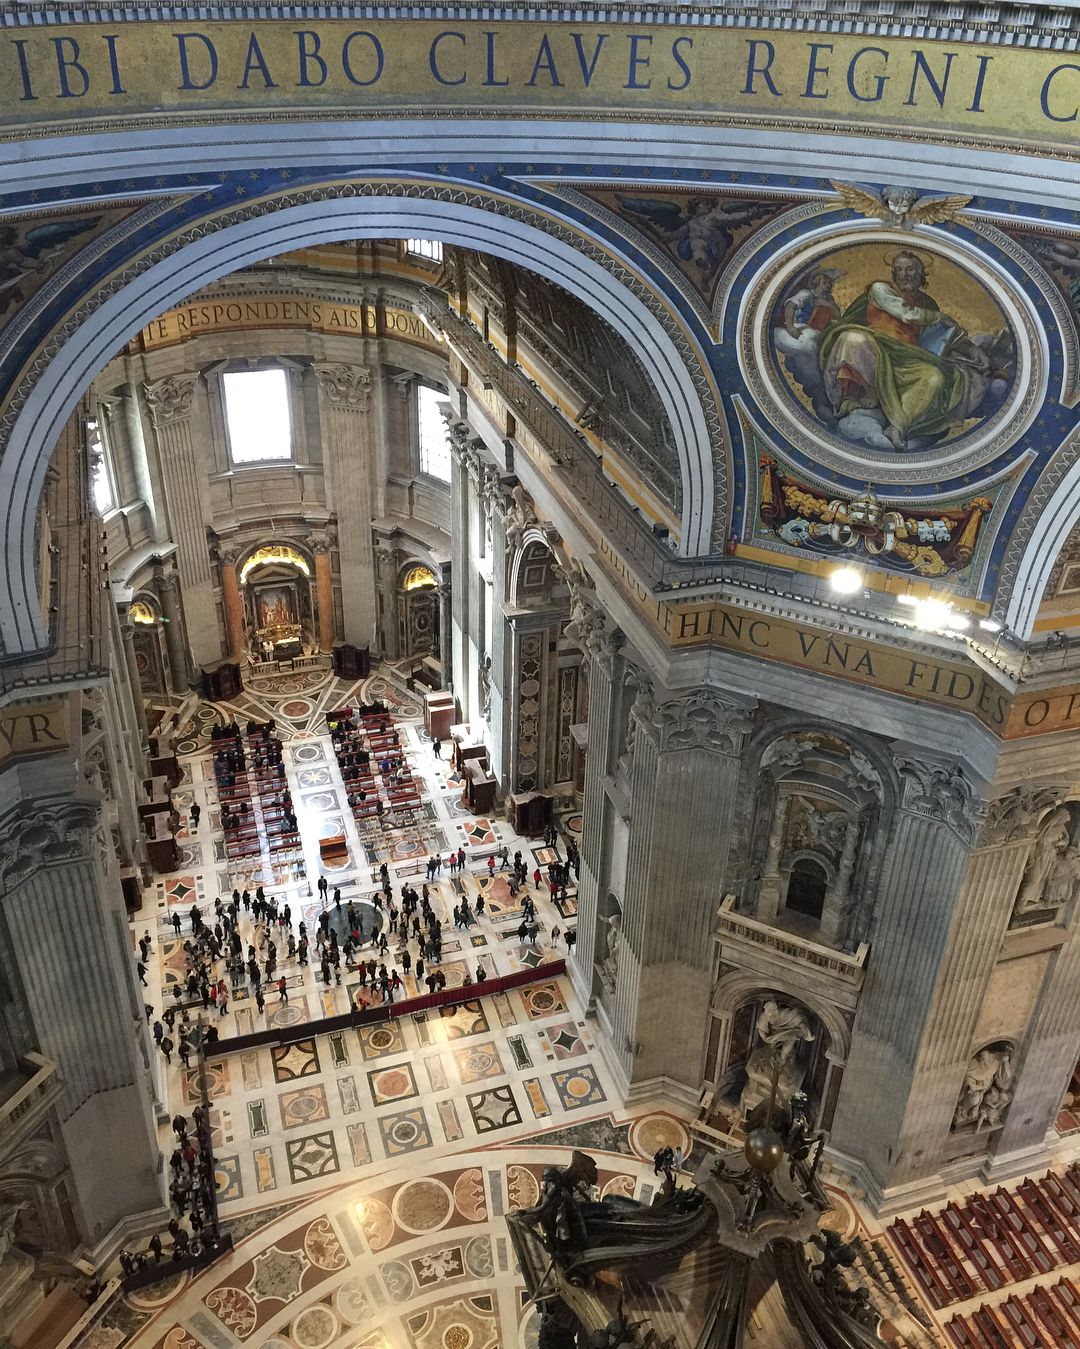 Inside view of St. Peter's Basilica